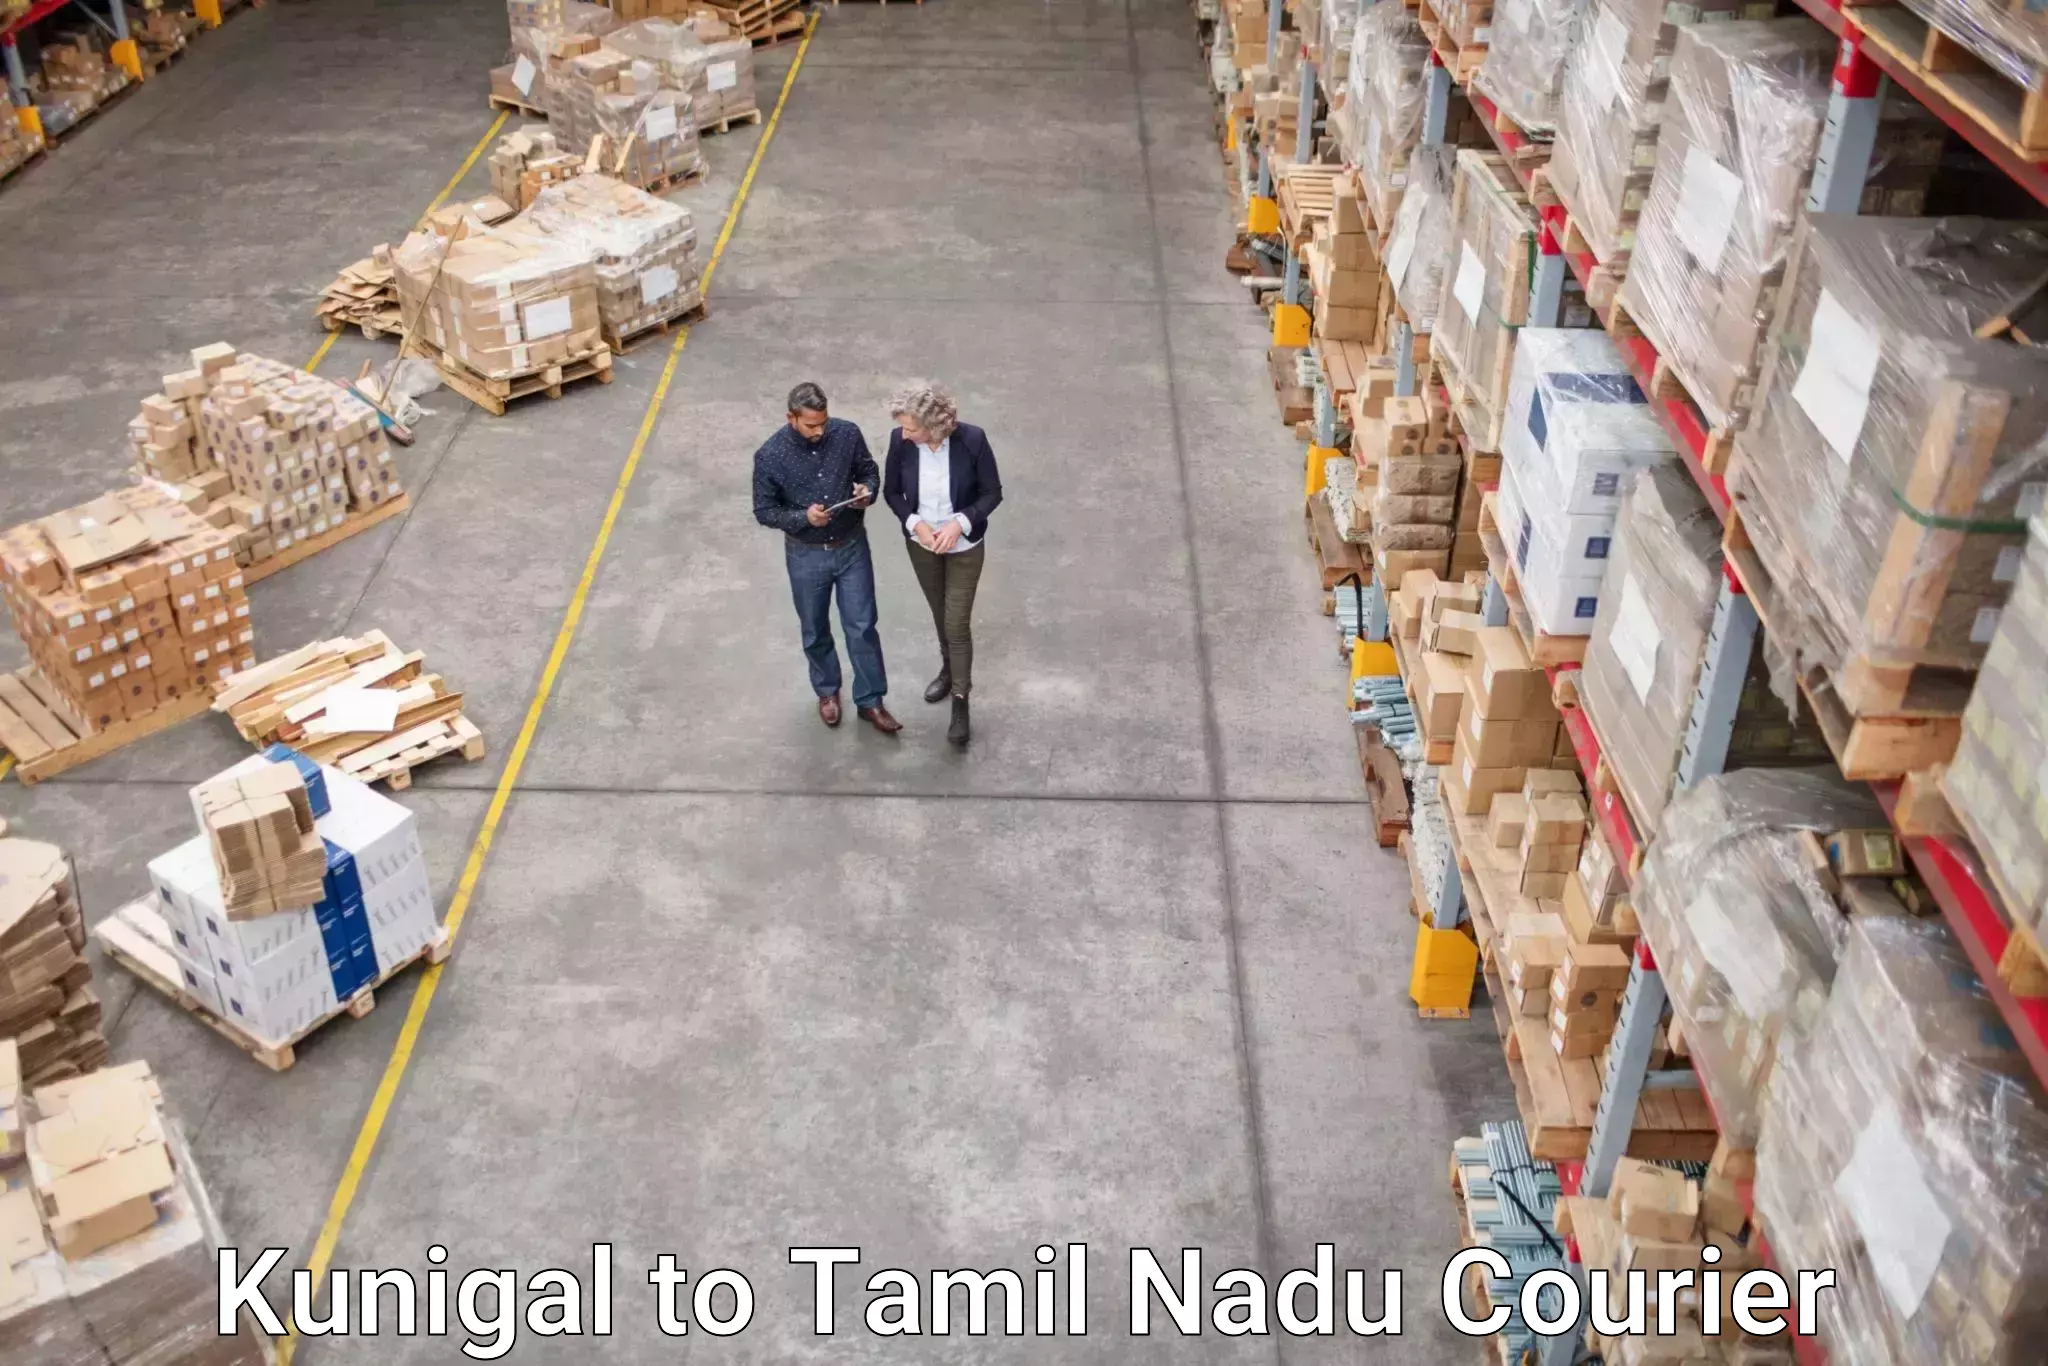 Express delivery network Kunigal to Tuticorin Port